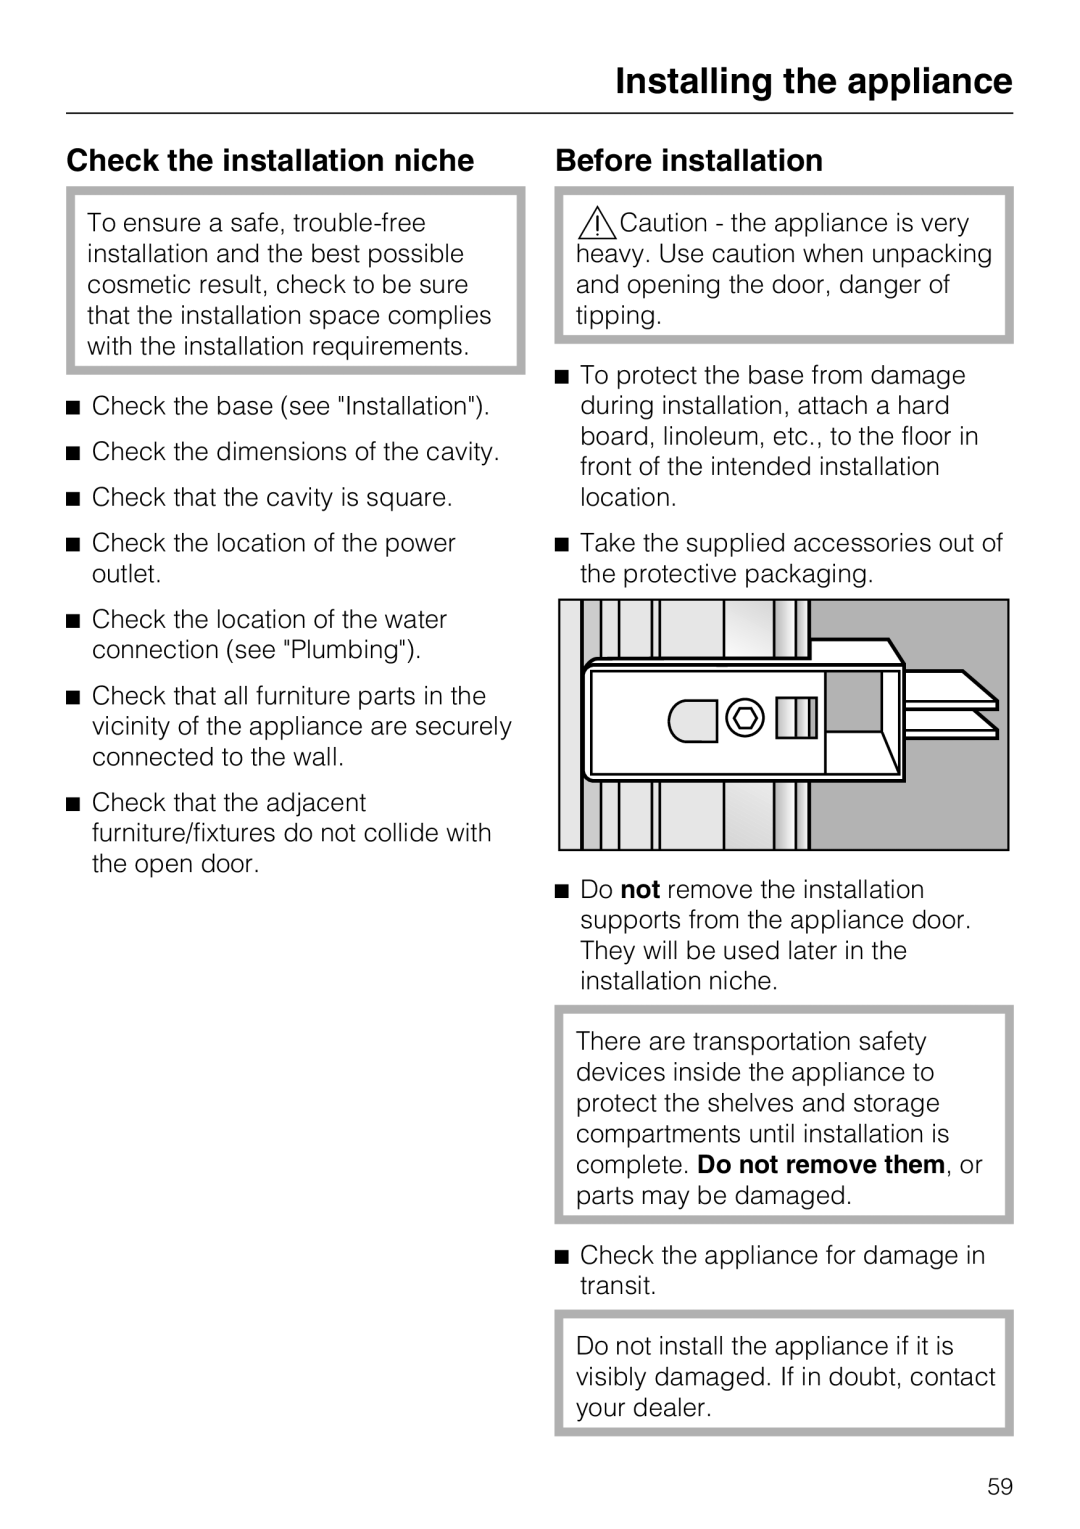 Miele F1471VI installation instructions Check the installation niche, Before installation, Installing the appliance 